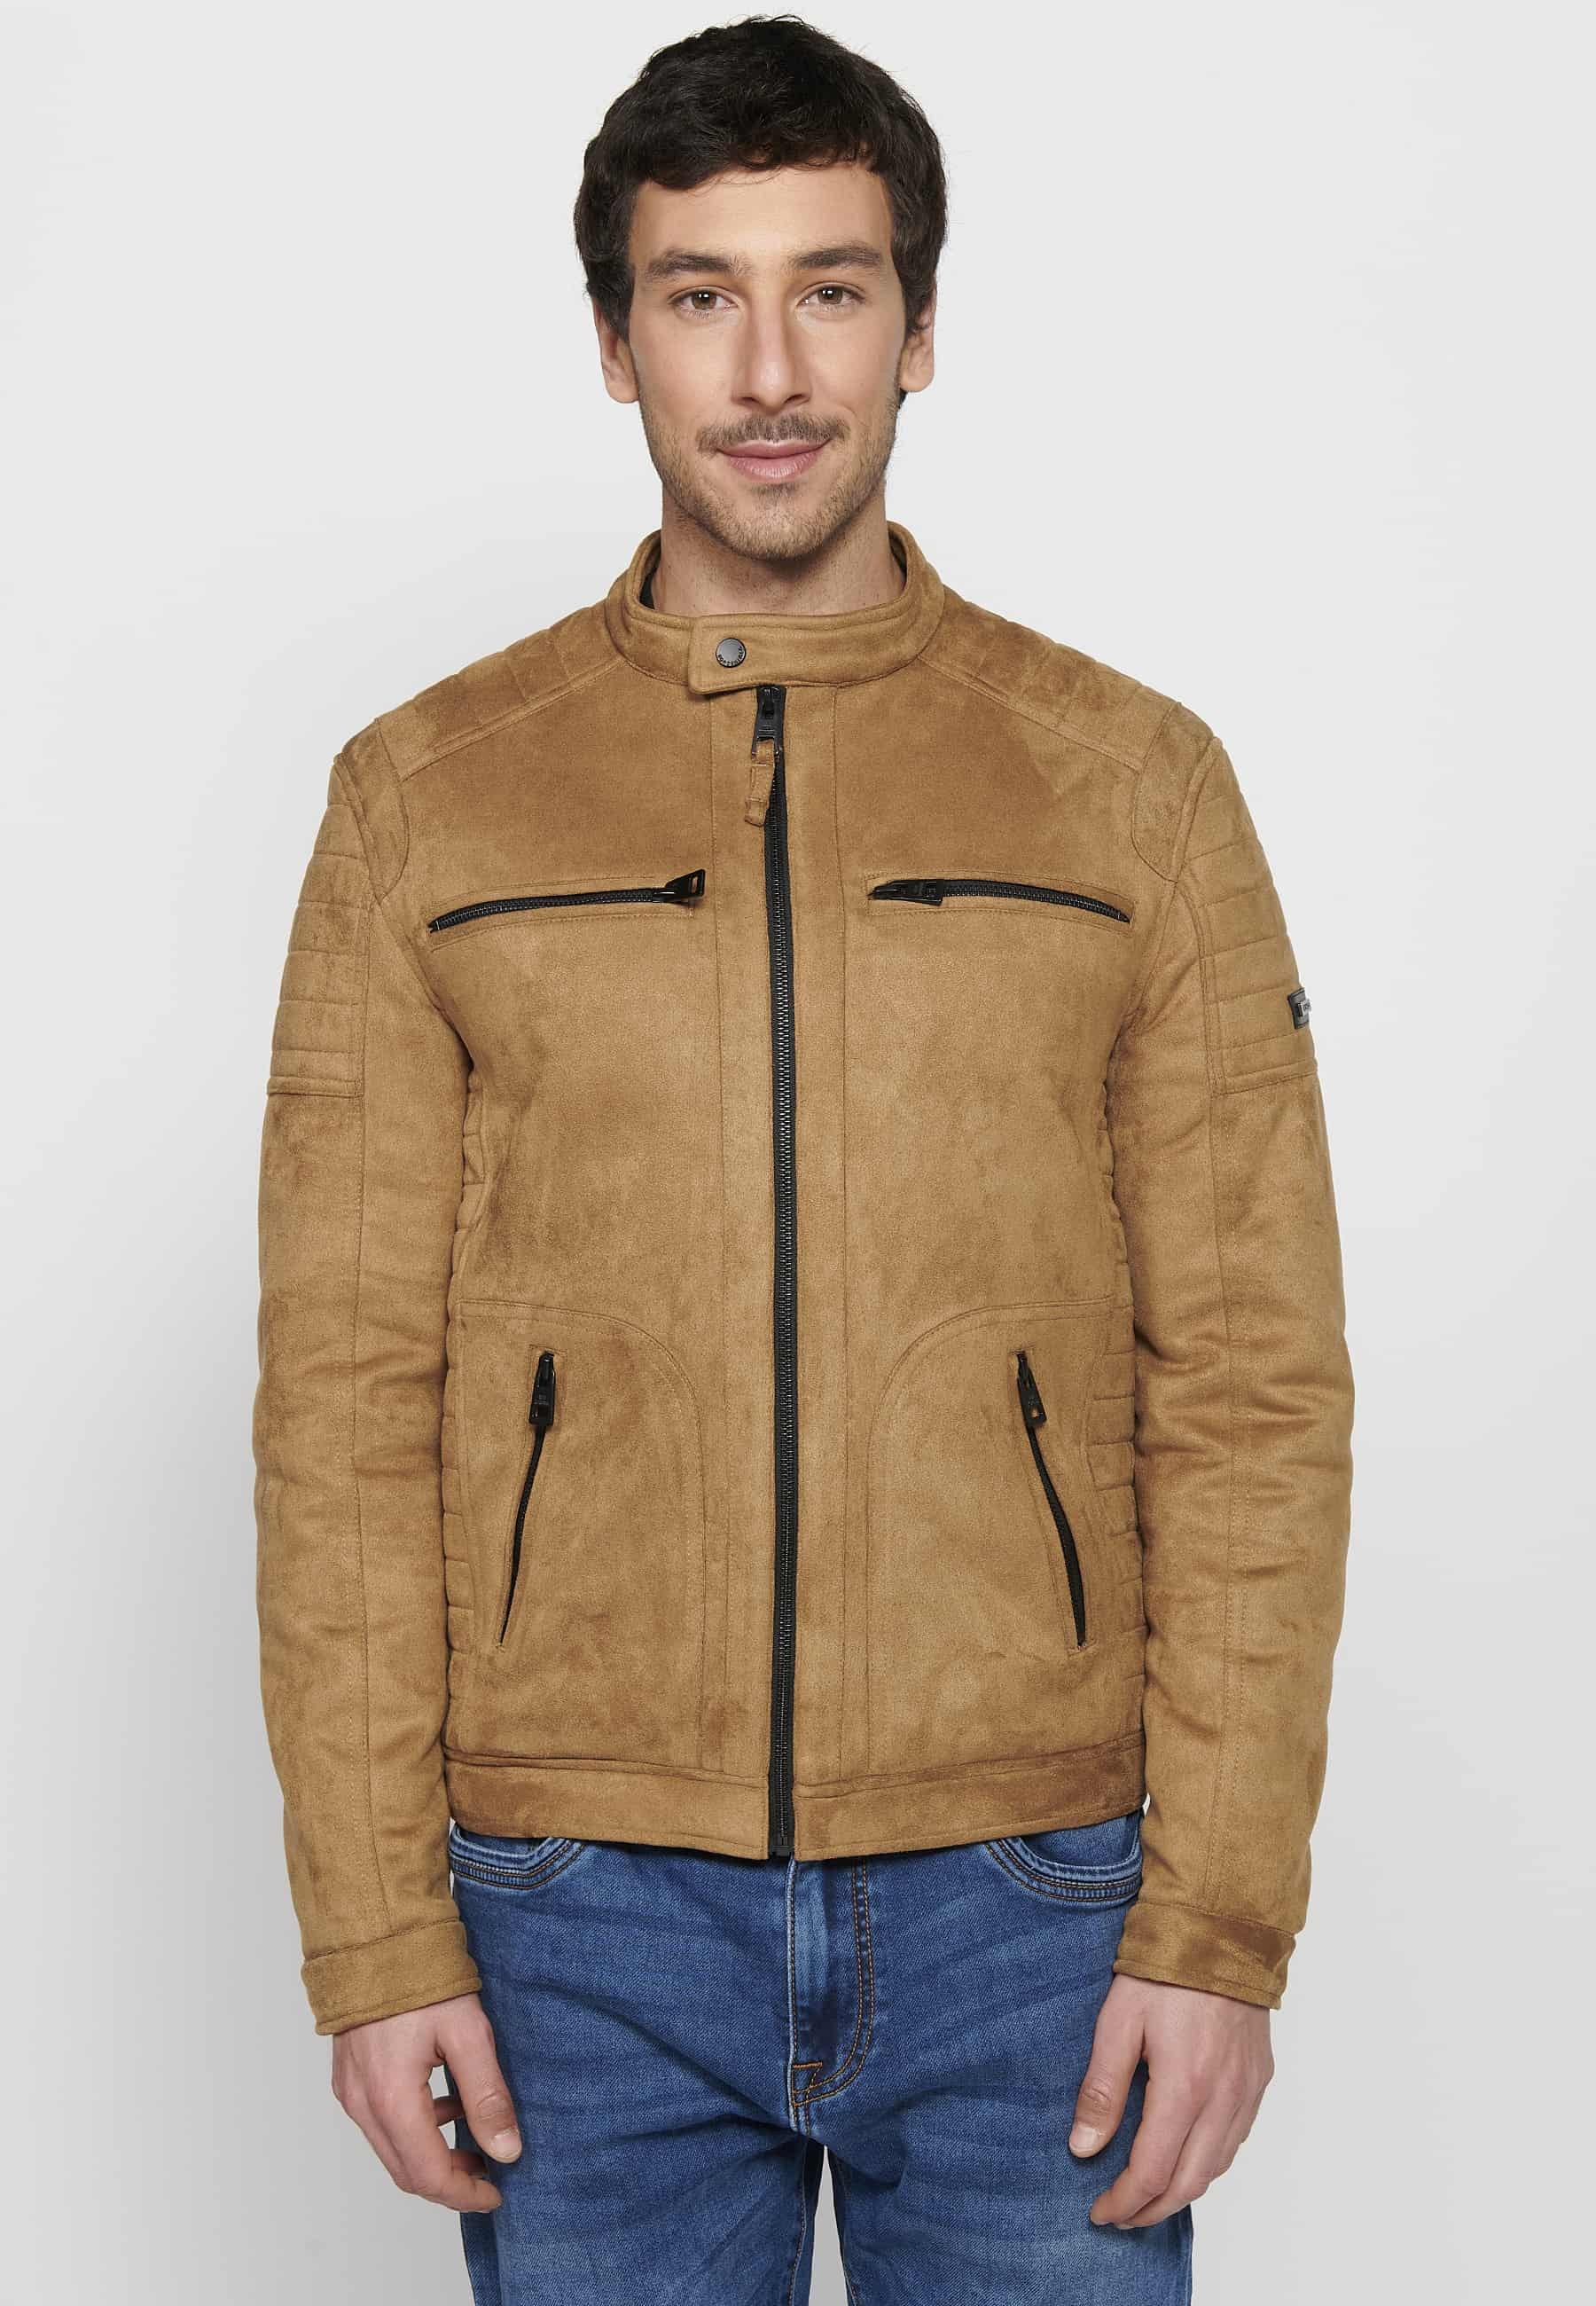 Men's Long Sleeve Jacket with Round Neck and Zipper Front Closure with Four Pockets in Tan Color 3